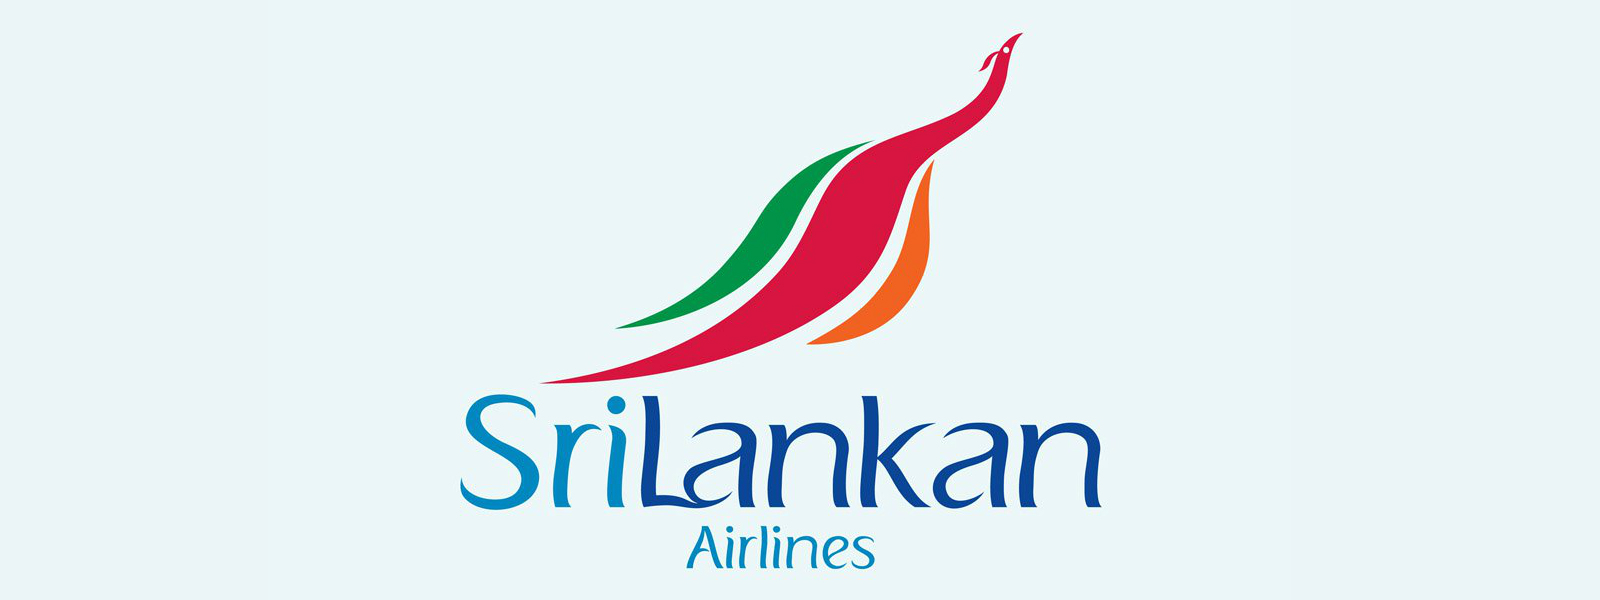 SriLankan named world's most punctual airline